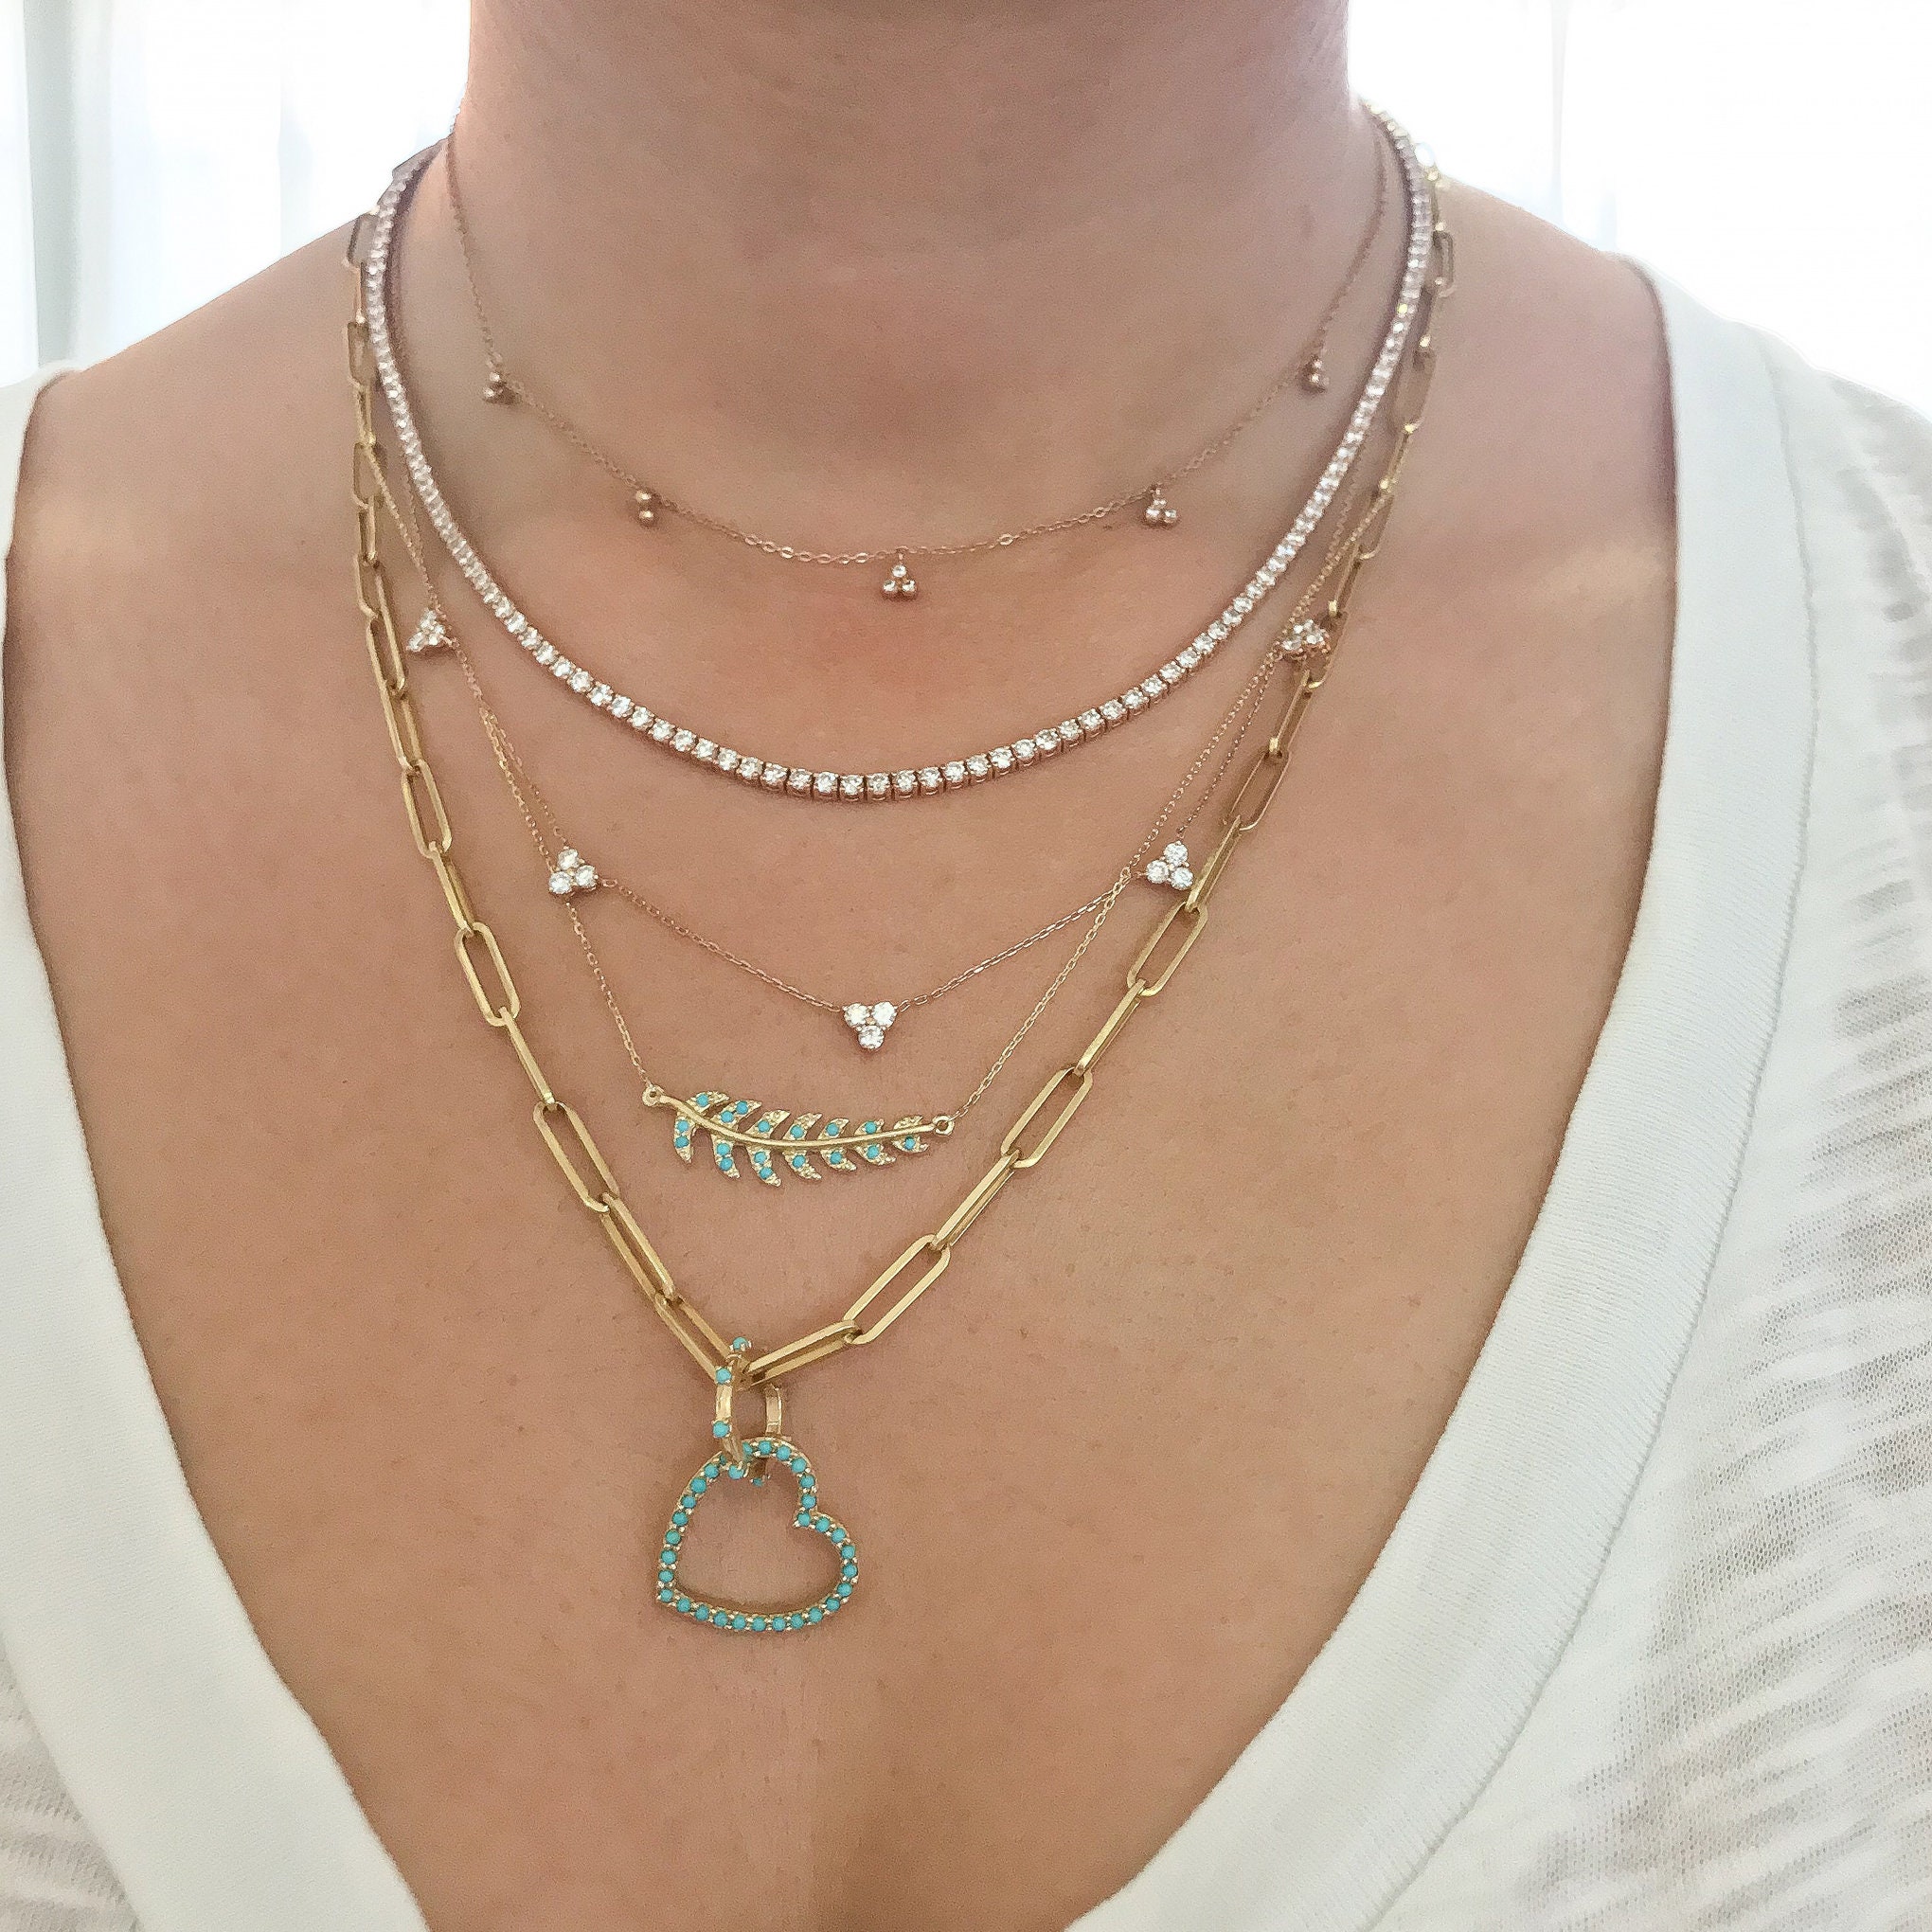 Split Oval Link & Double Thin Chain Necklace